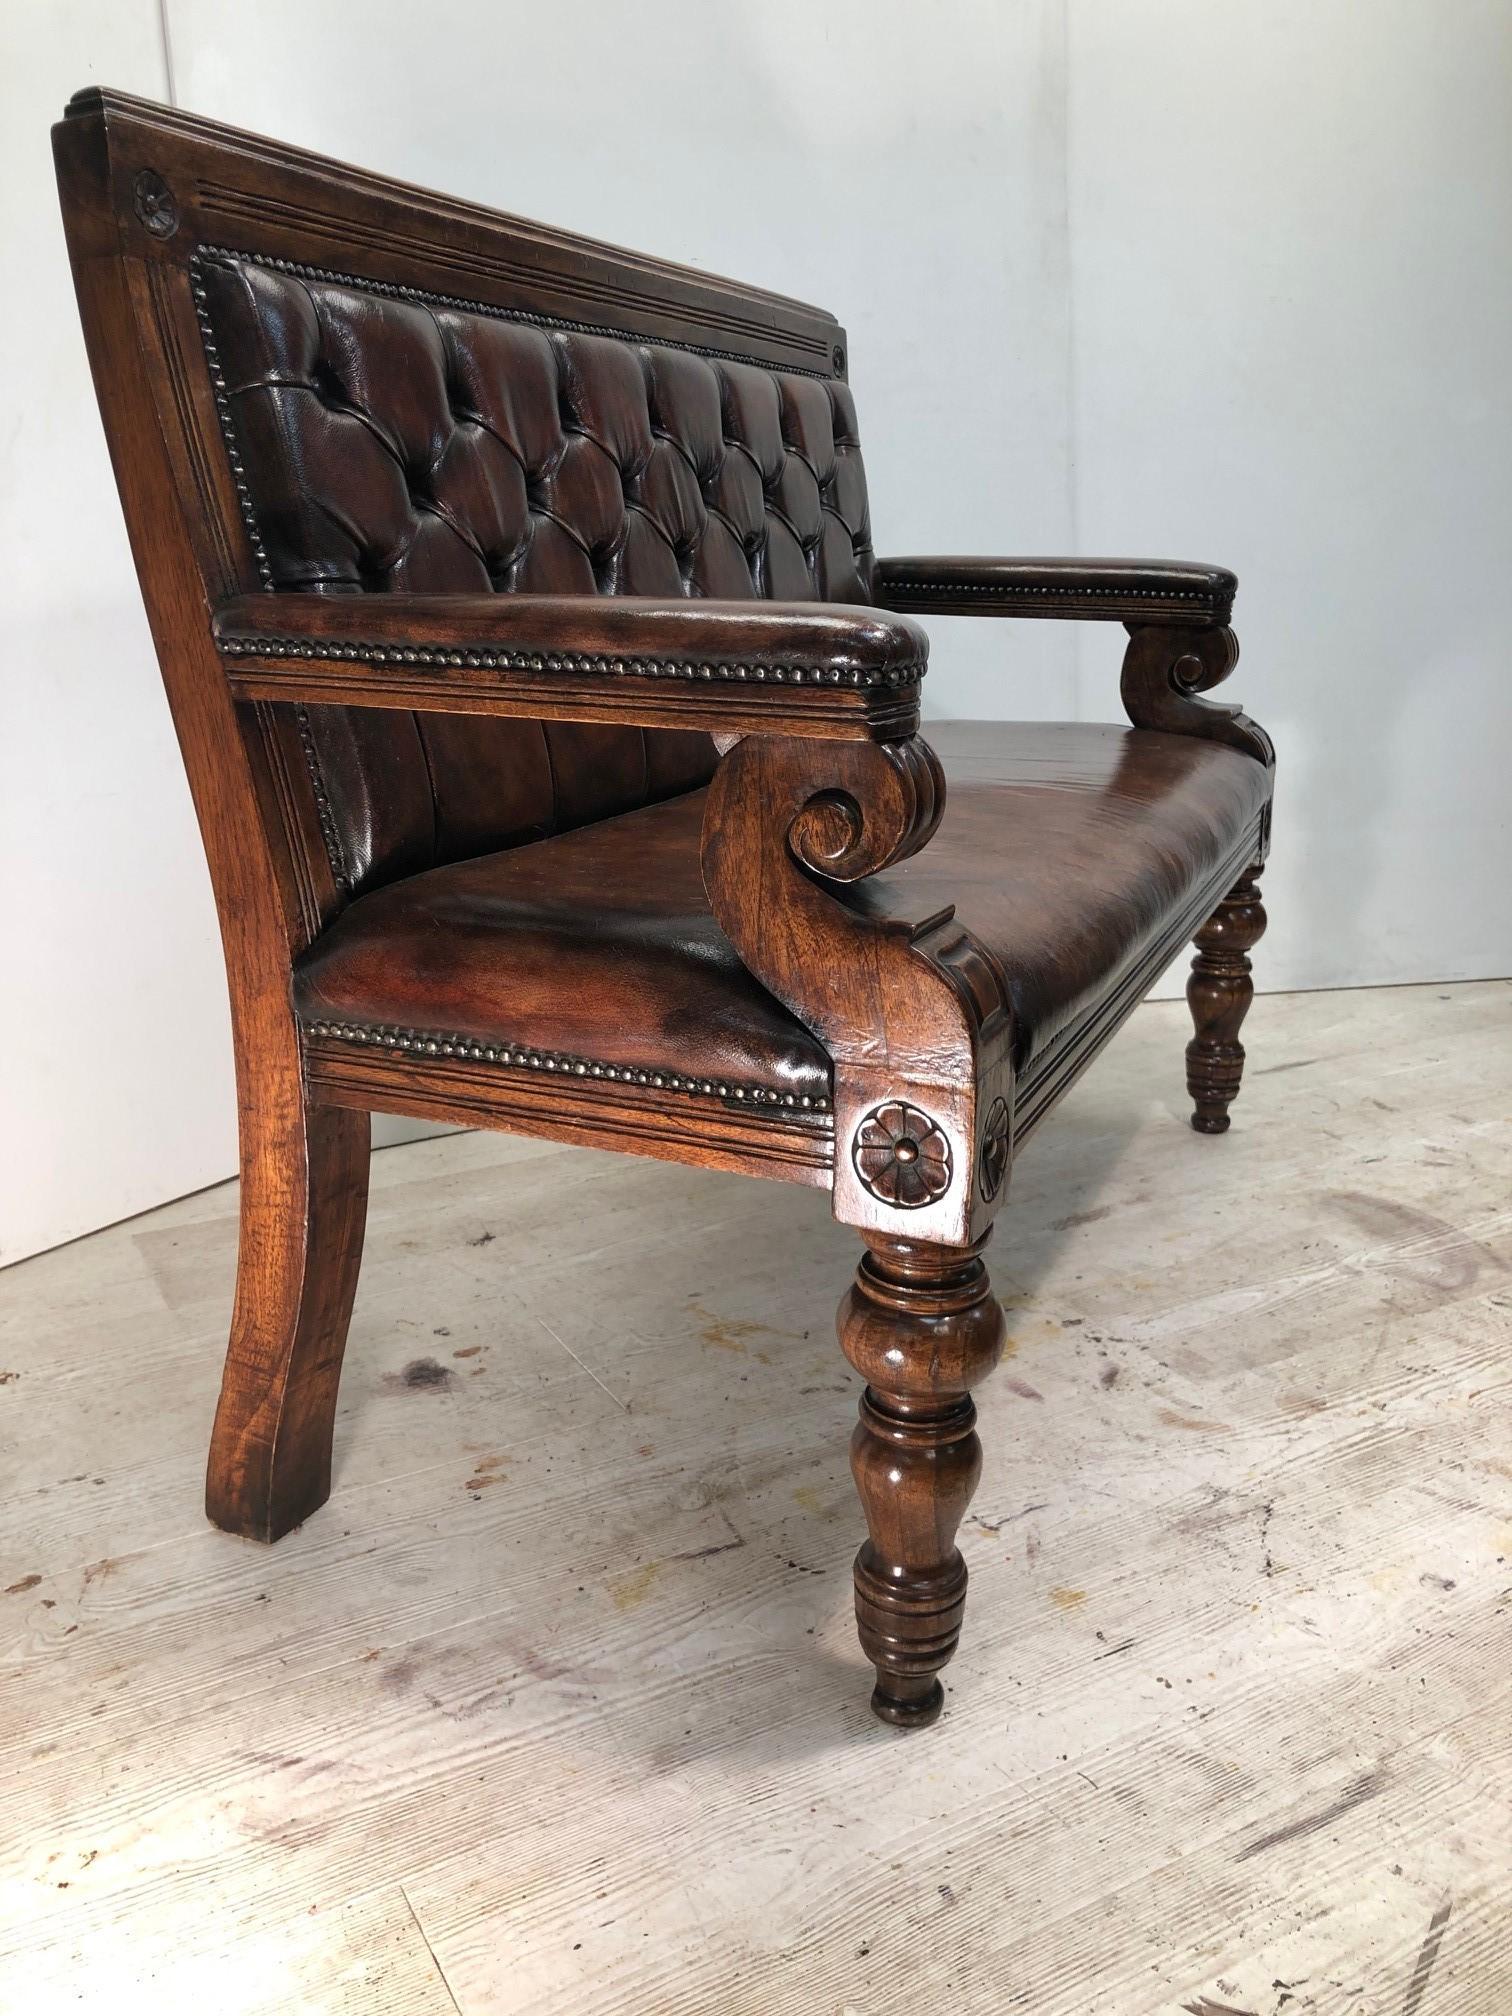 Hand-Crafted Stunning Antique circa 1900 English Oak & Brown Leather Chesterfield Bench